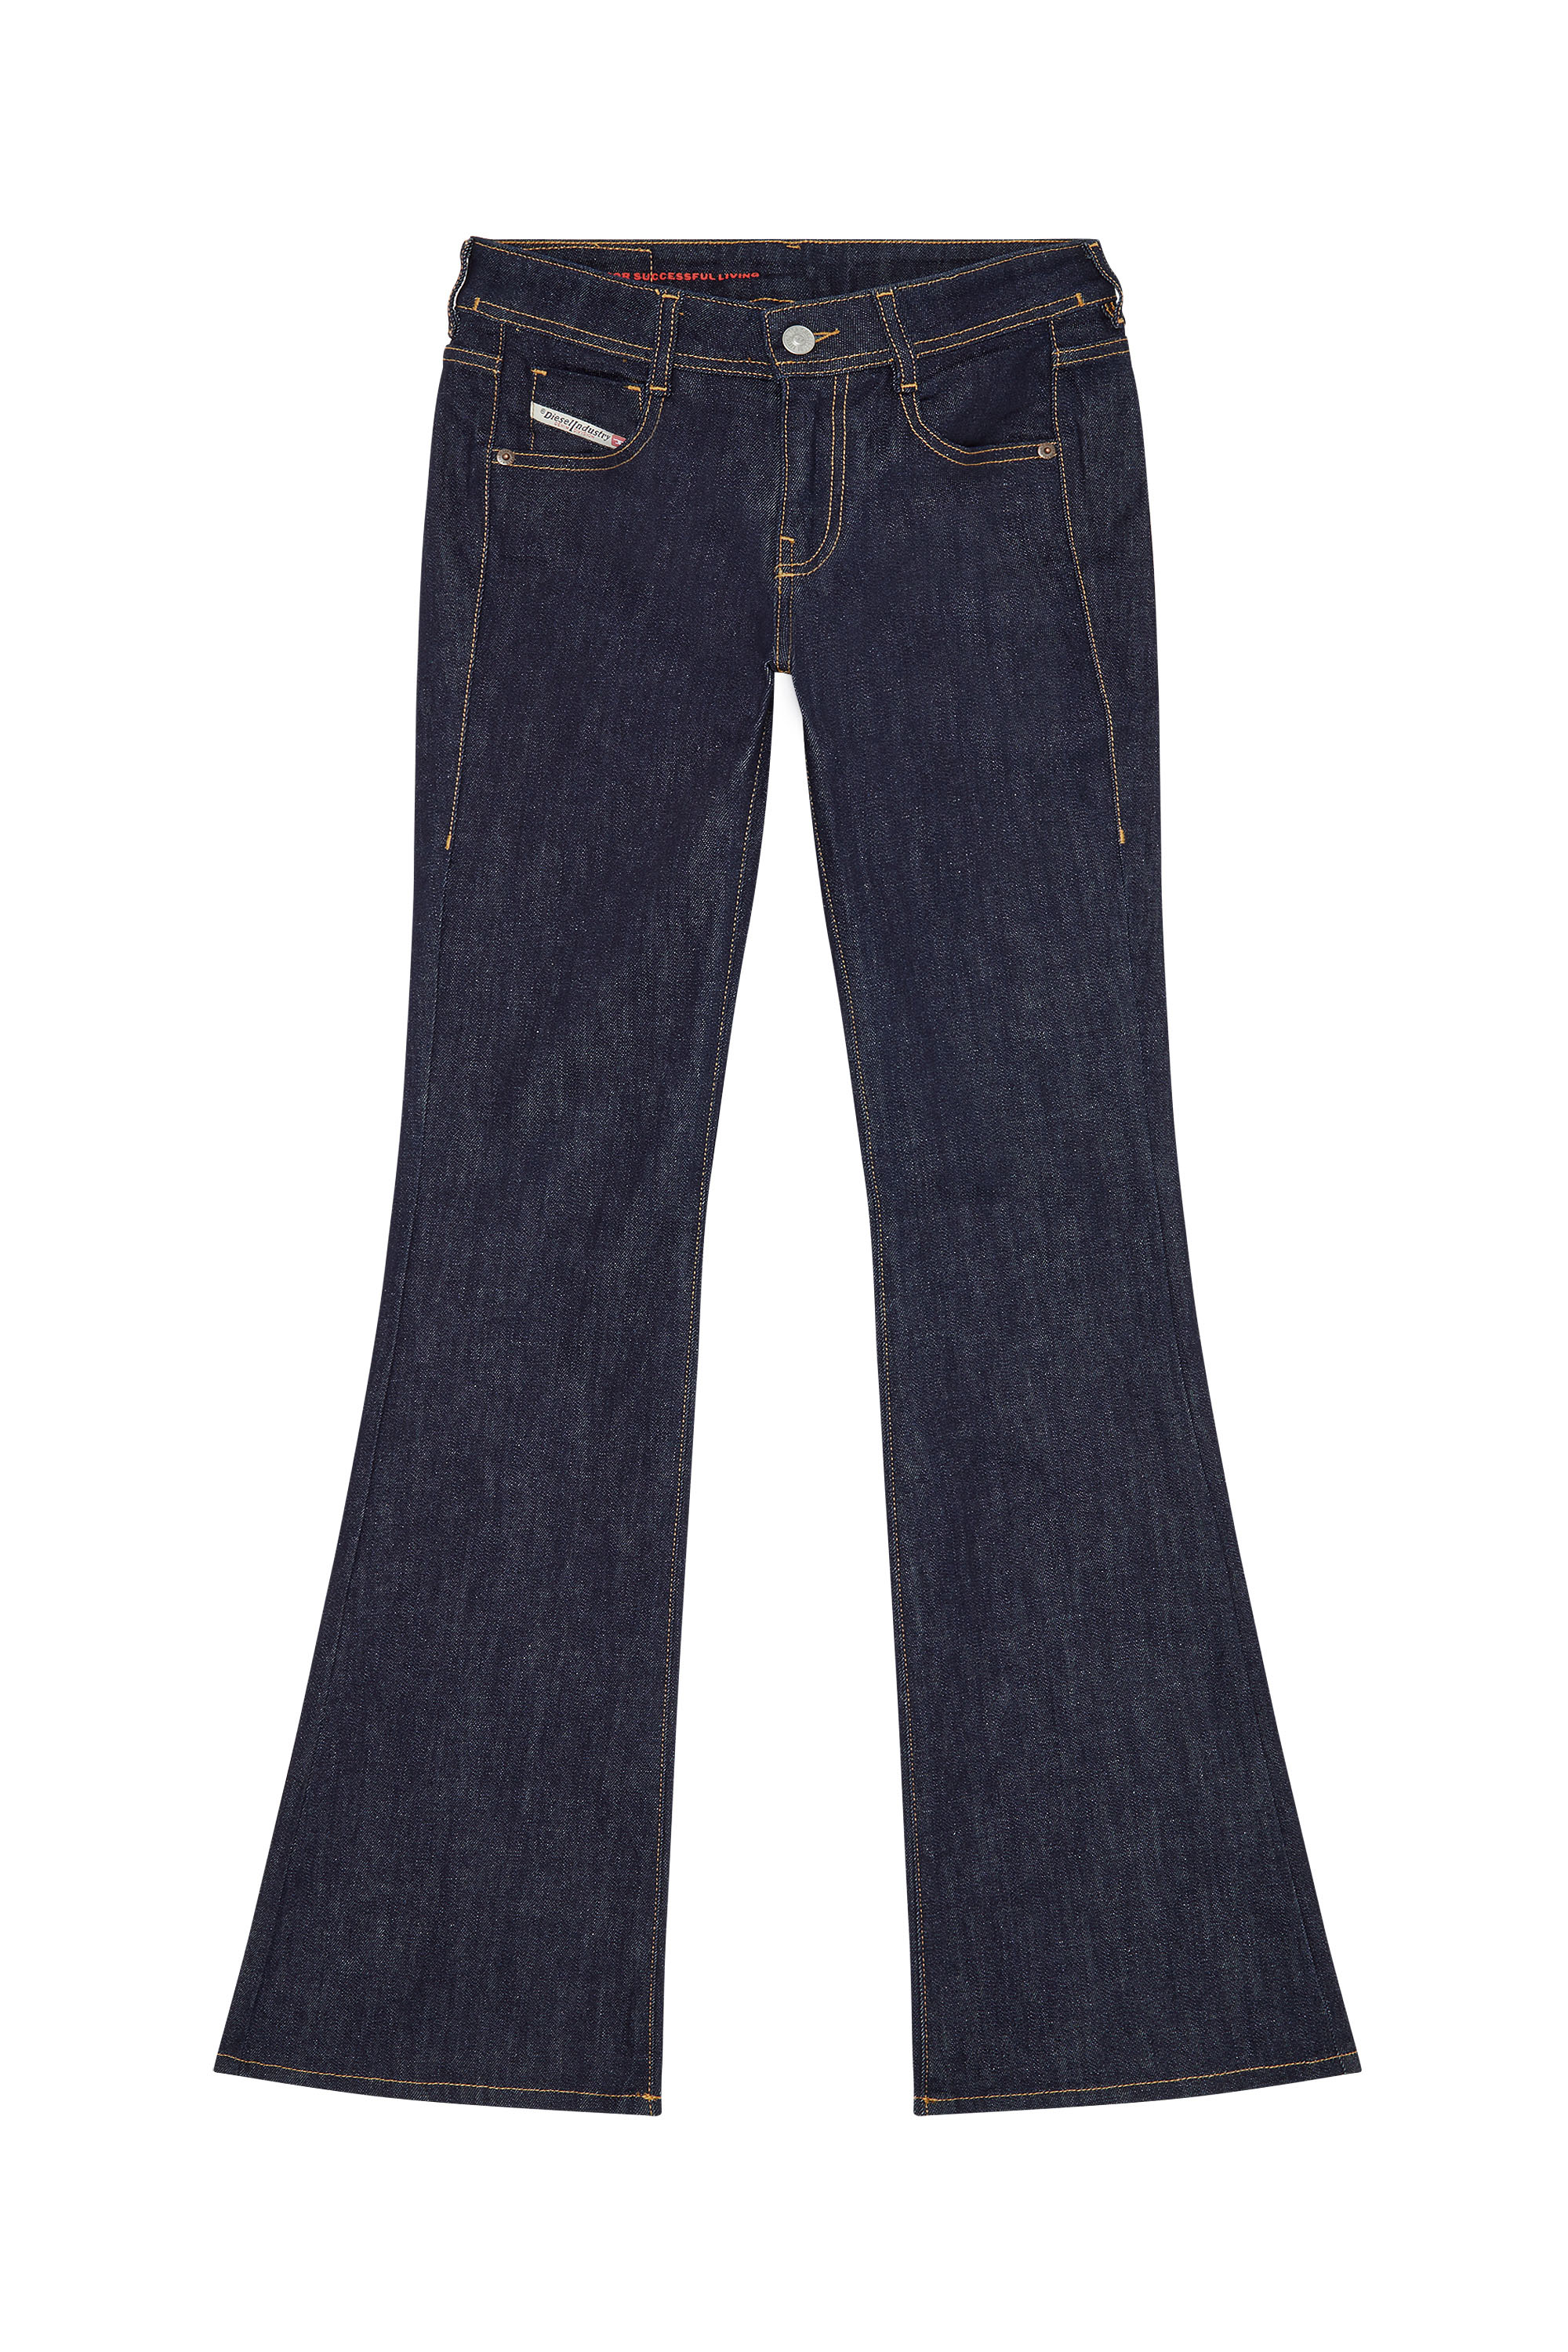 Bootcut and Flare Jeans 1969 D-Ebbey Z9B89, Dark Blue - Jeans